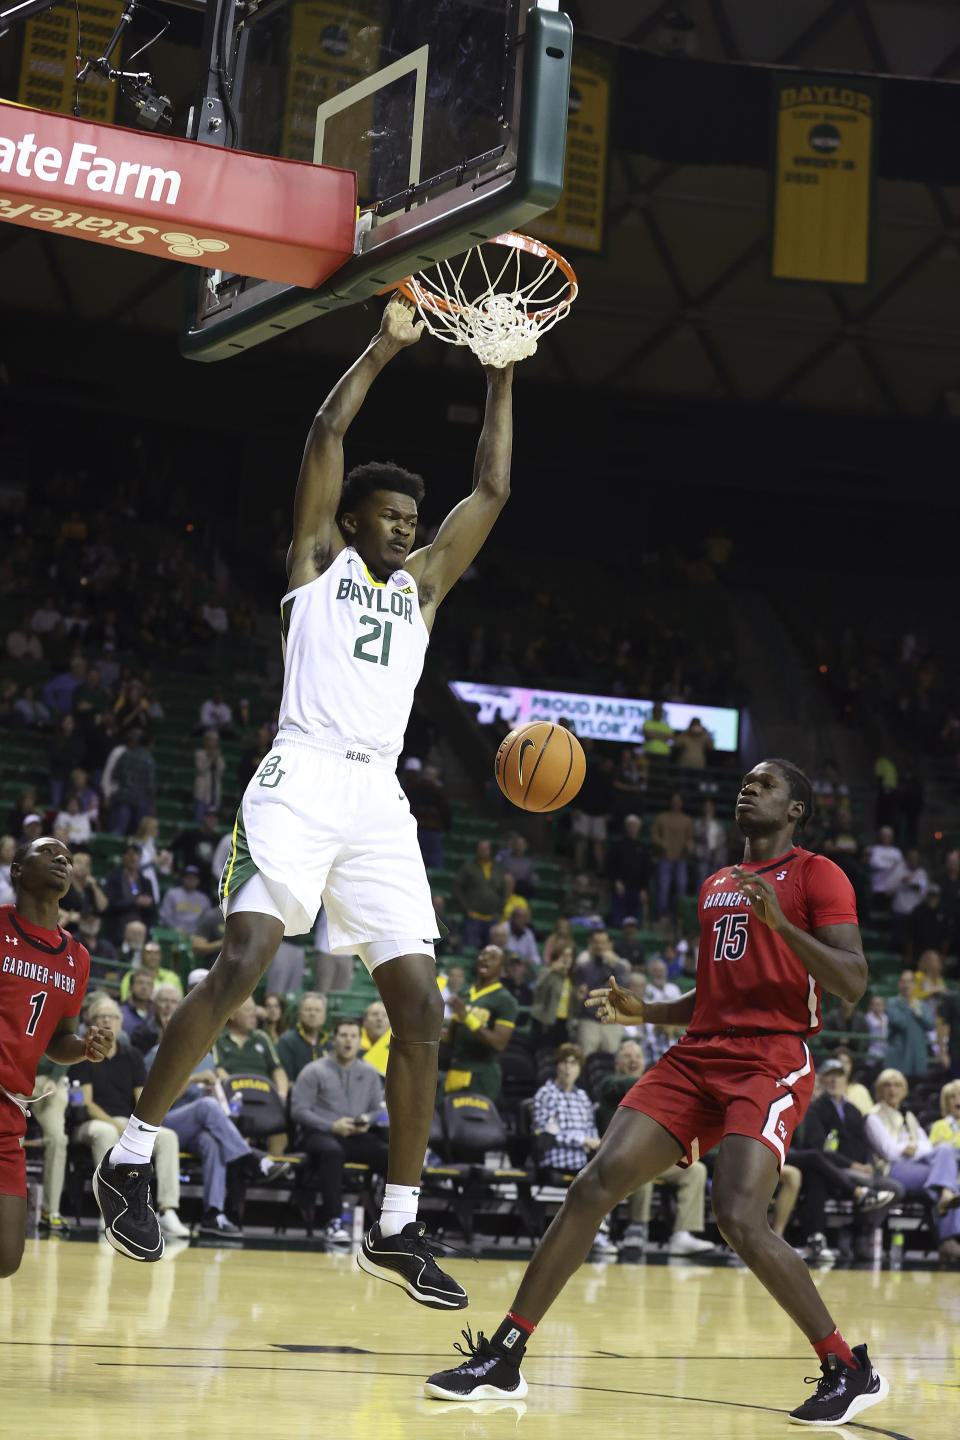 Baylor center Yves Missi (21) dunks past Gardner-Webb forward Cheickna Sissoko (15) in the first half of an NCAA college basketball game, Sunday, Nov. 12, 2023, in Waco, Texas. (AP Photo/Jerry Larson)